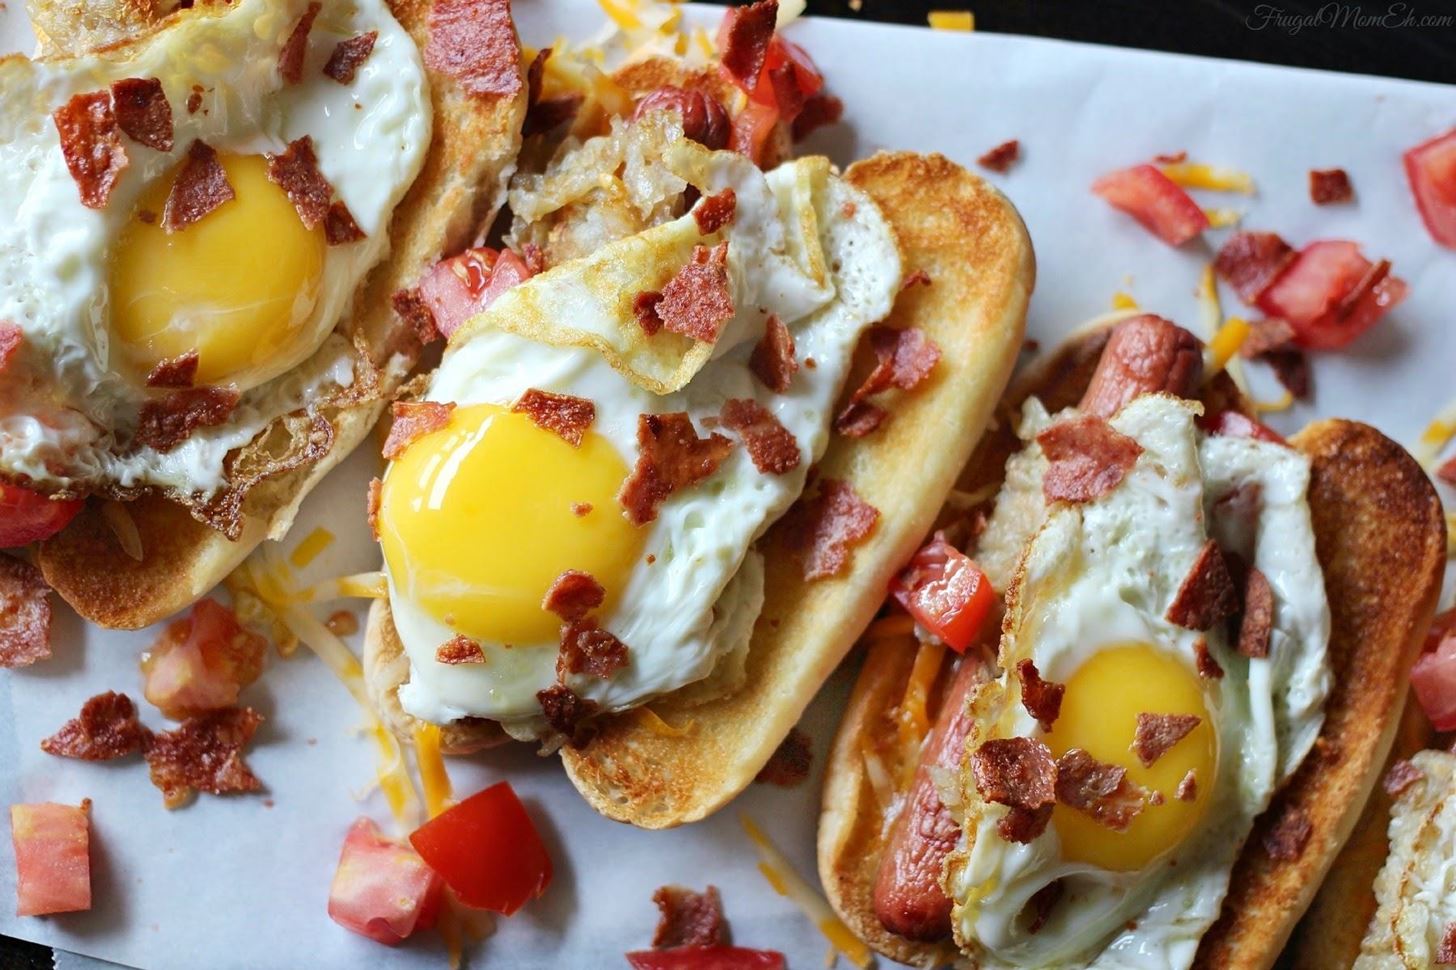 Plop an Egg on Your Hot Dog, Plus 9 More Wacky Upgrades